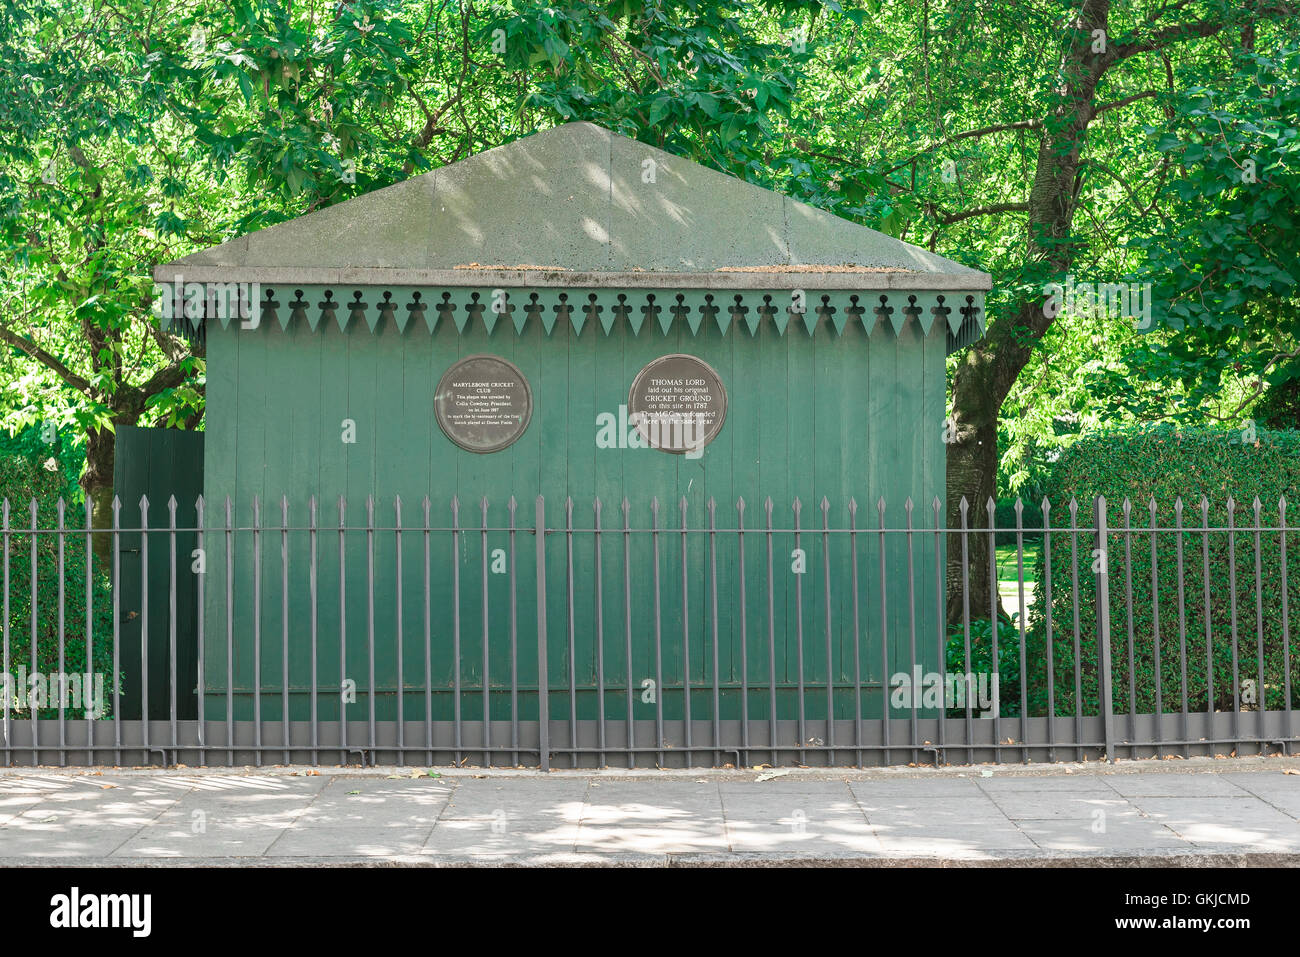 Original Lords cricket ground, view of a small wooden pavilion in Dorset Square, London, site of the first MCC cricket ground in 1787, England, UK Stock Photo